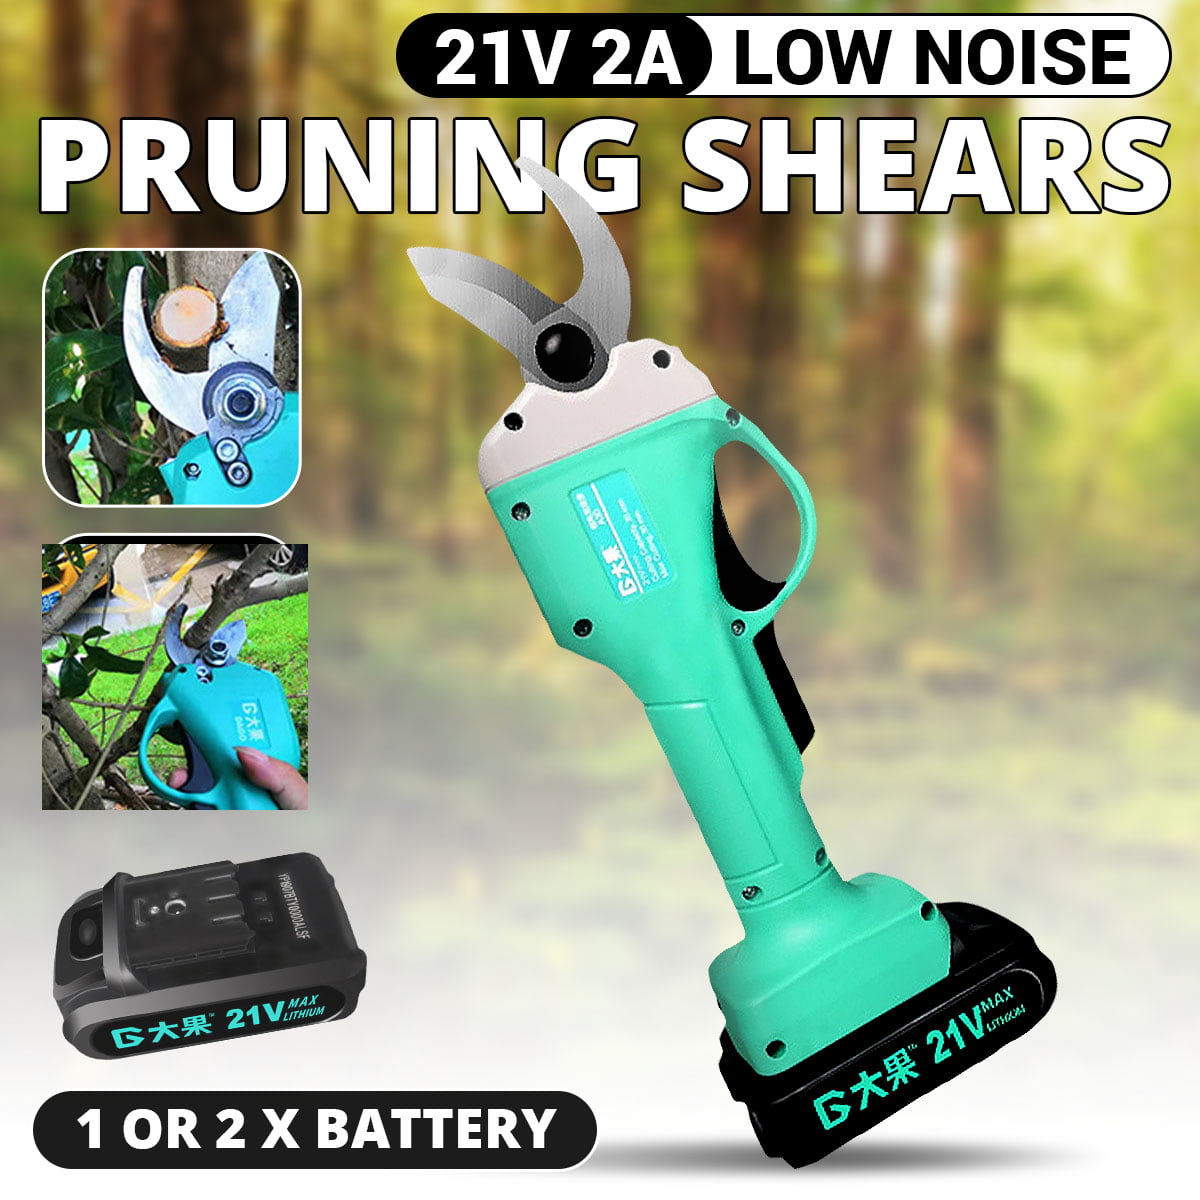 Details about   2021 New Professional LED Display Cordless Rechargeable Pruning Shears 2 Battery 